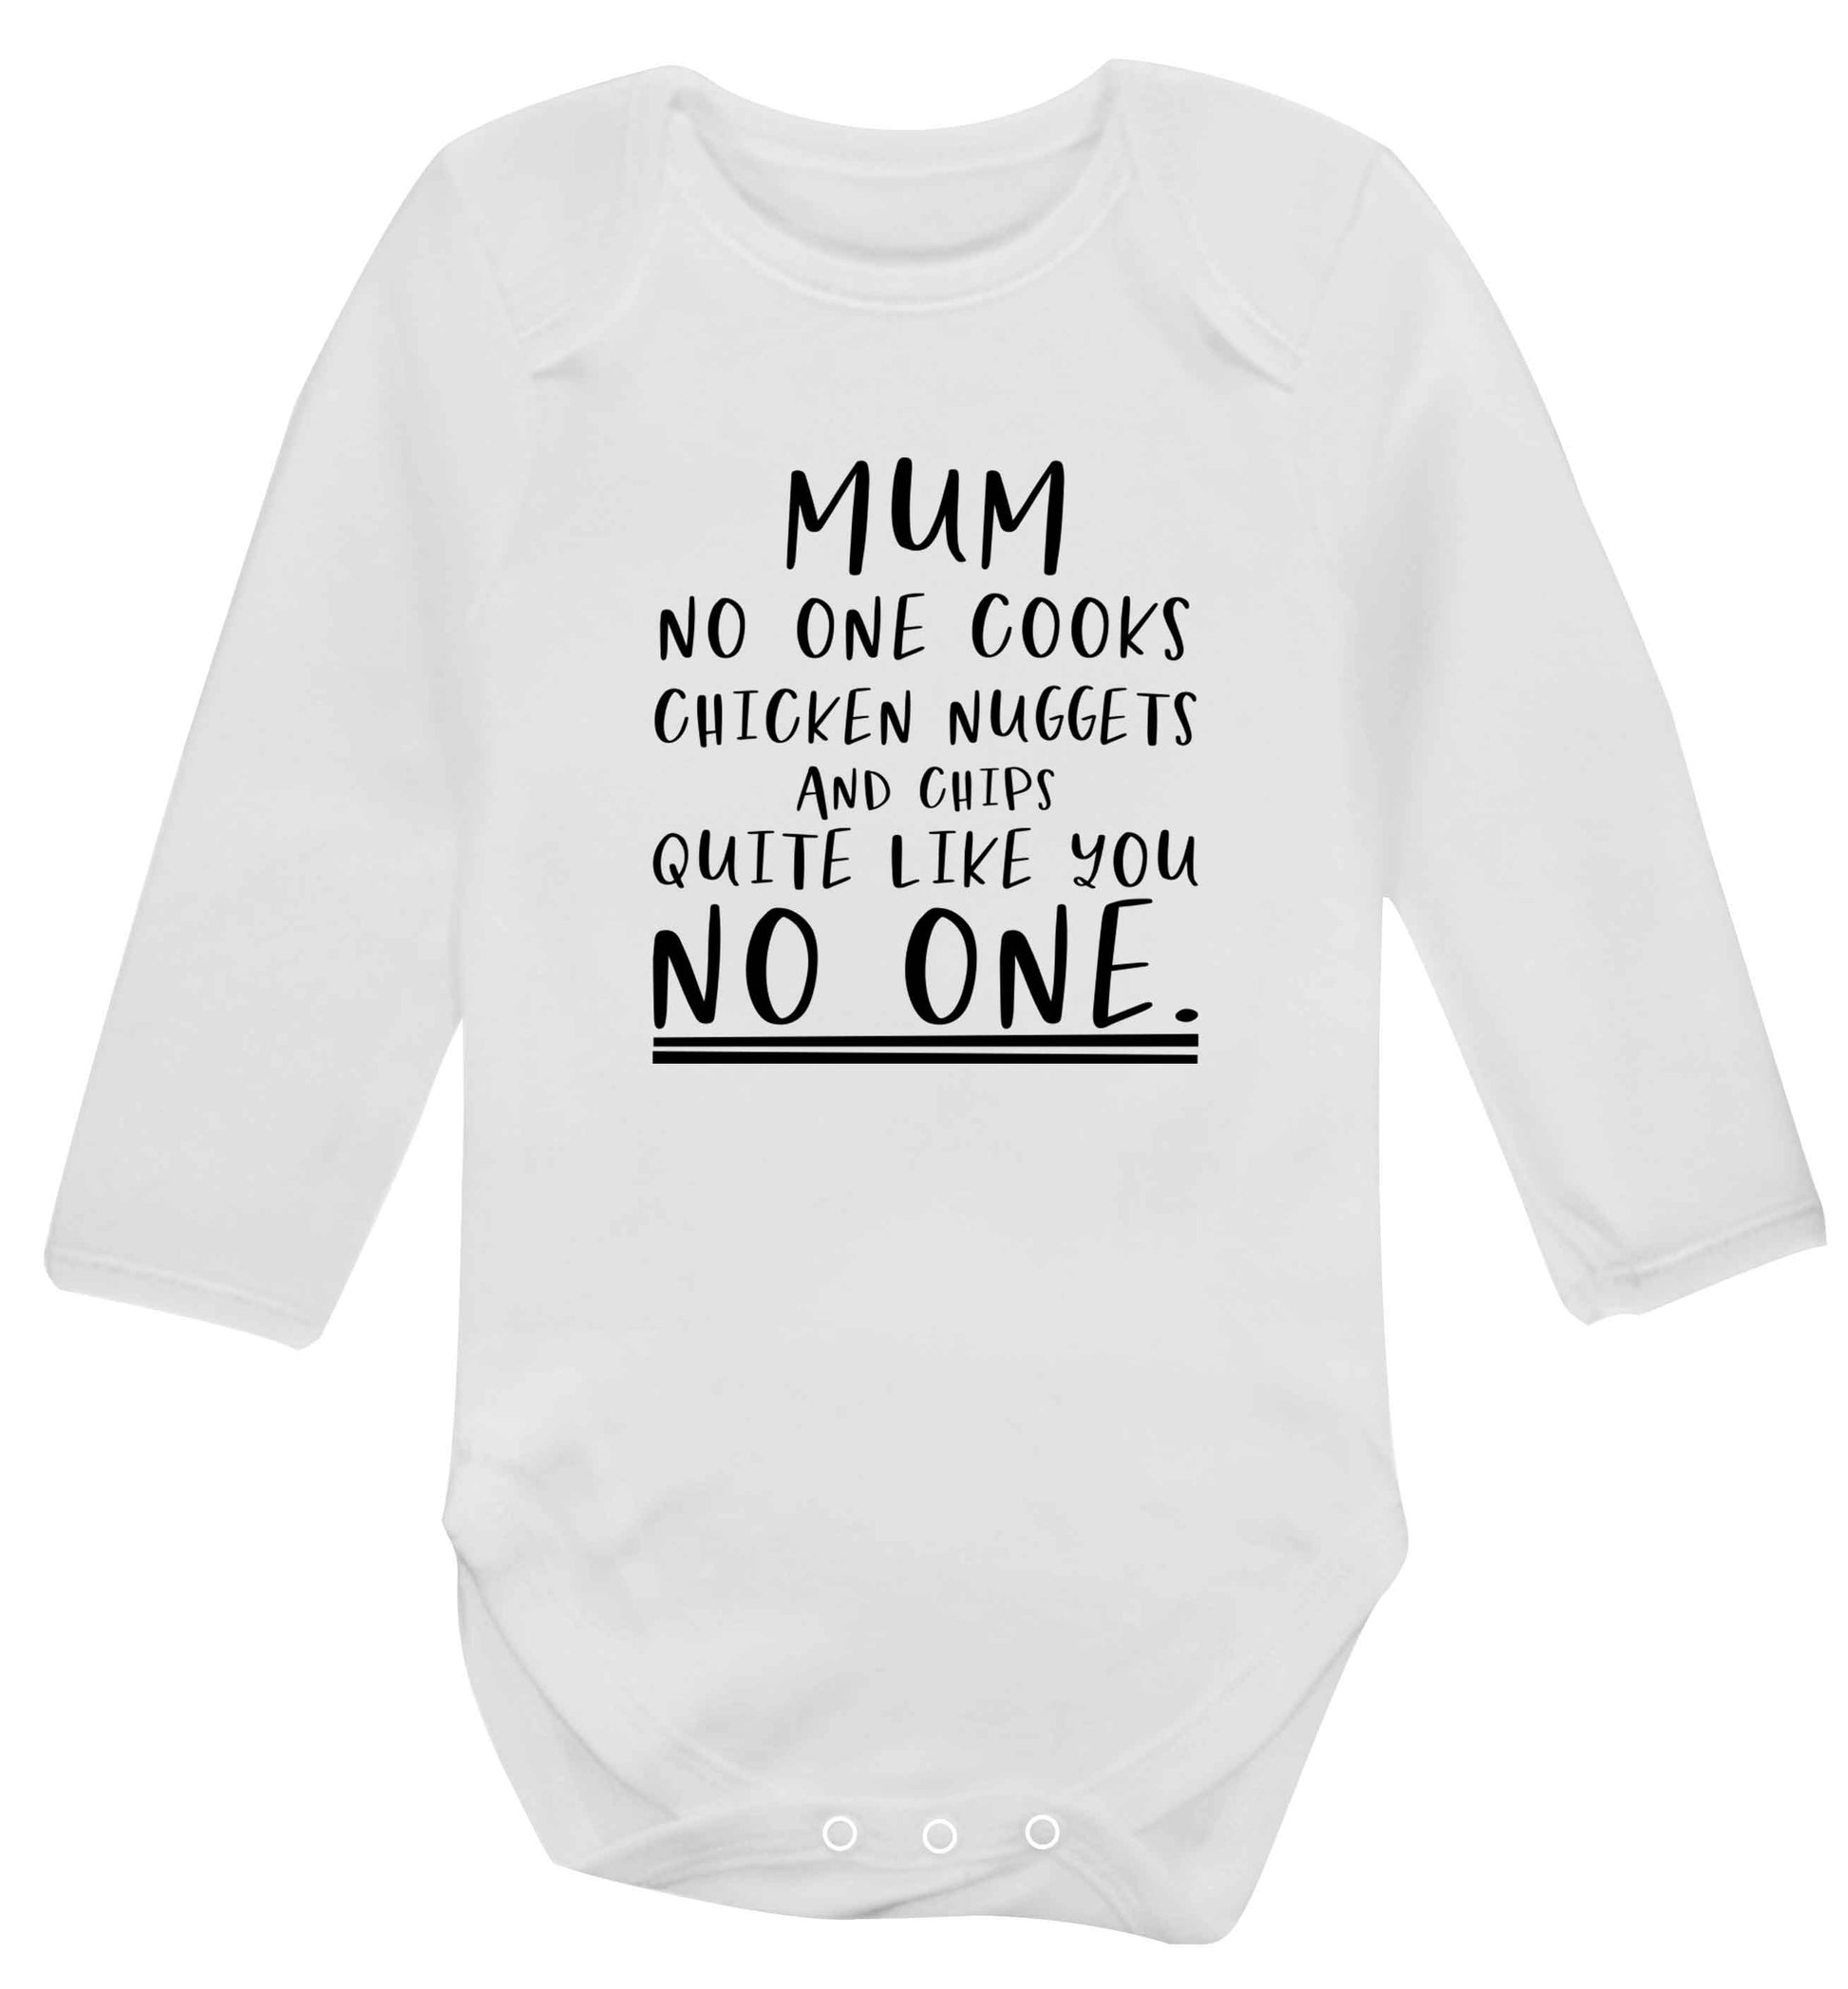 Super funny sassy gift for mother's day or birthday!  Mum no one cooks chicken nuggets and chips like you no one baby vest long sleeved white 6-12 months